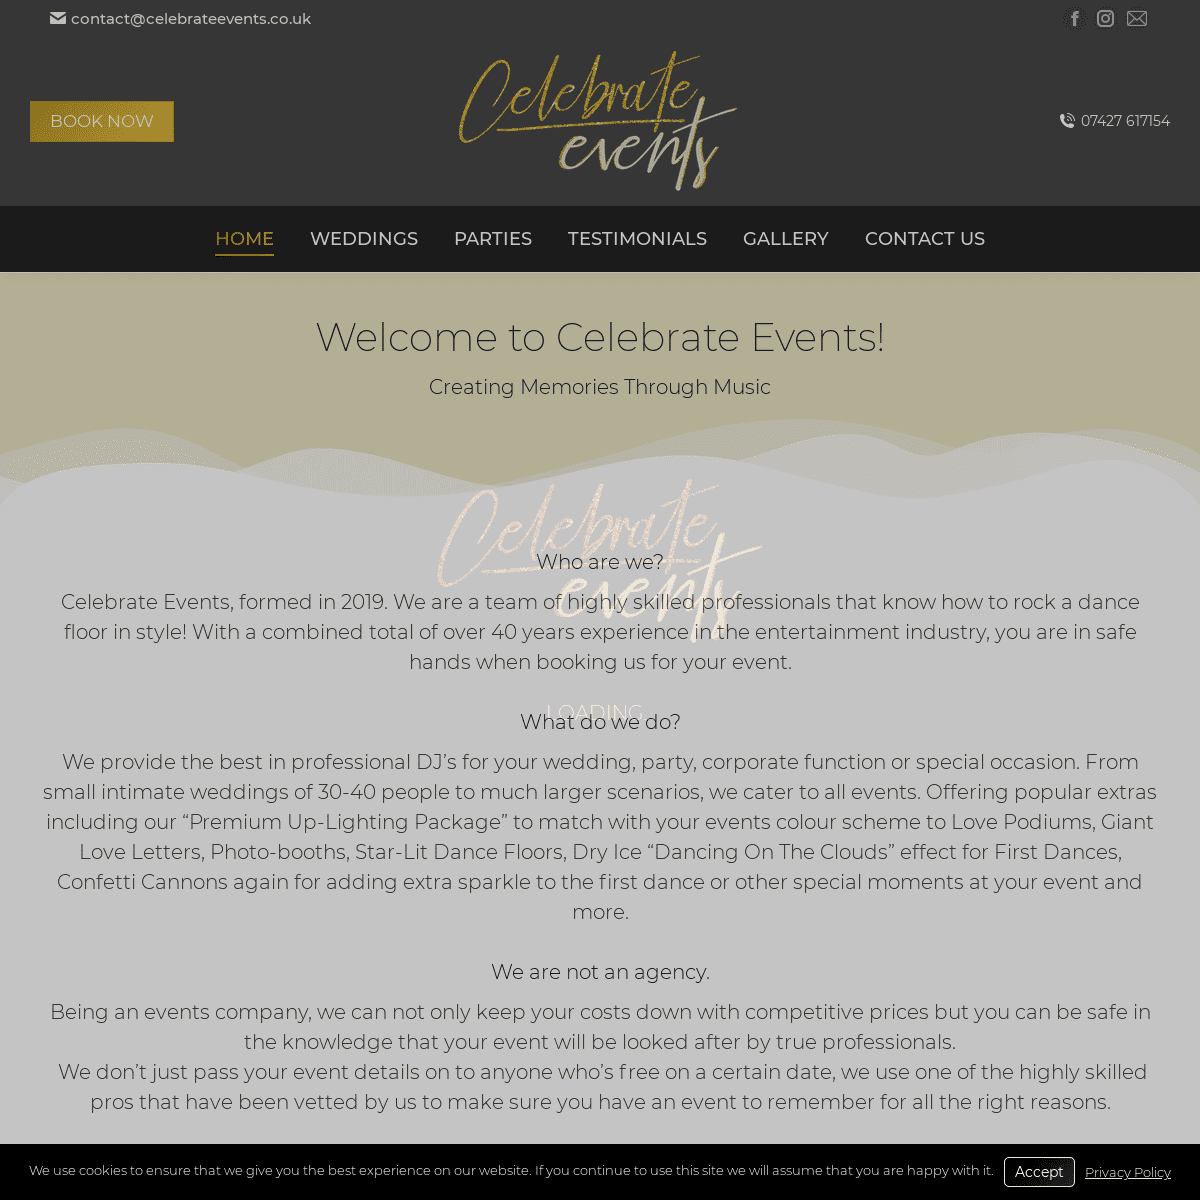 A complete backup of https://celebrateevents.co.uk